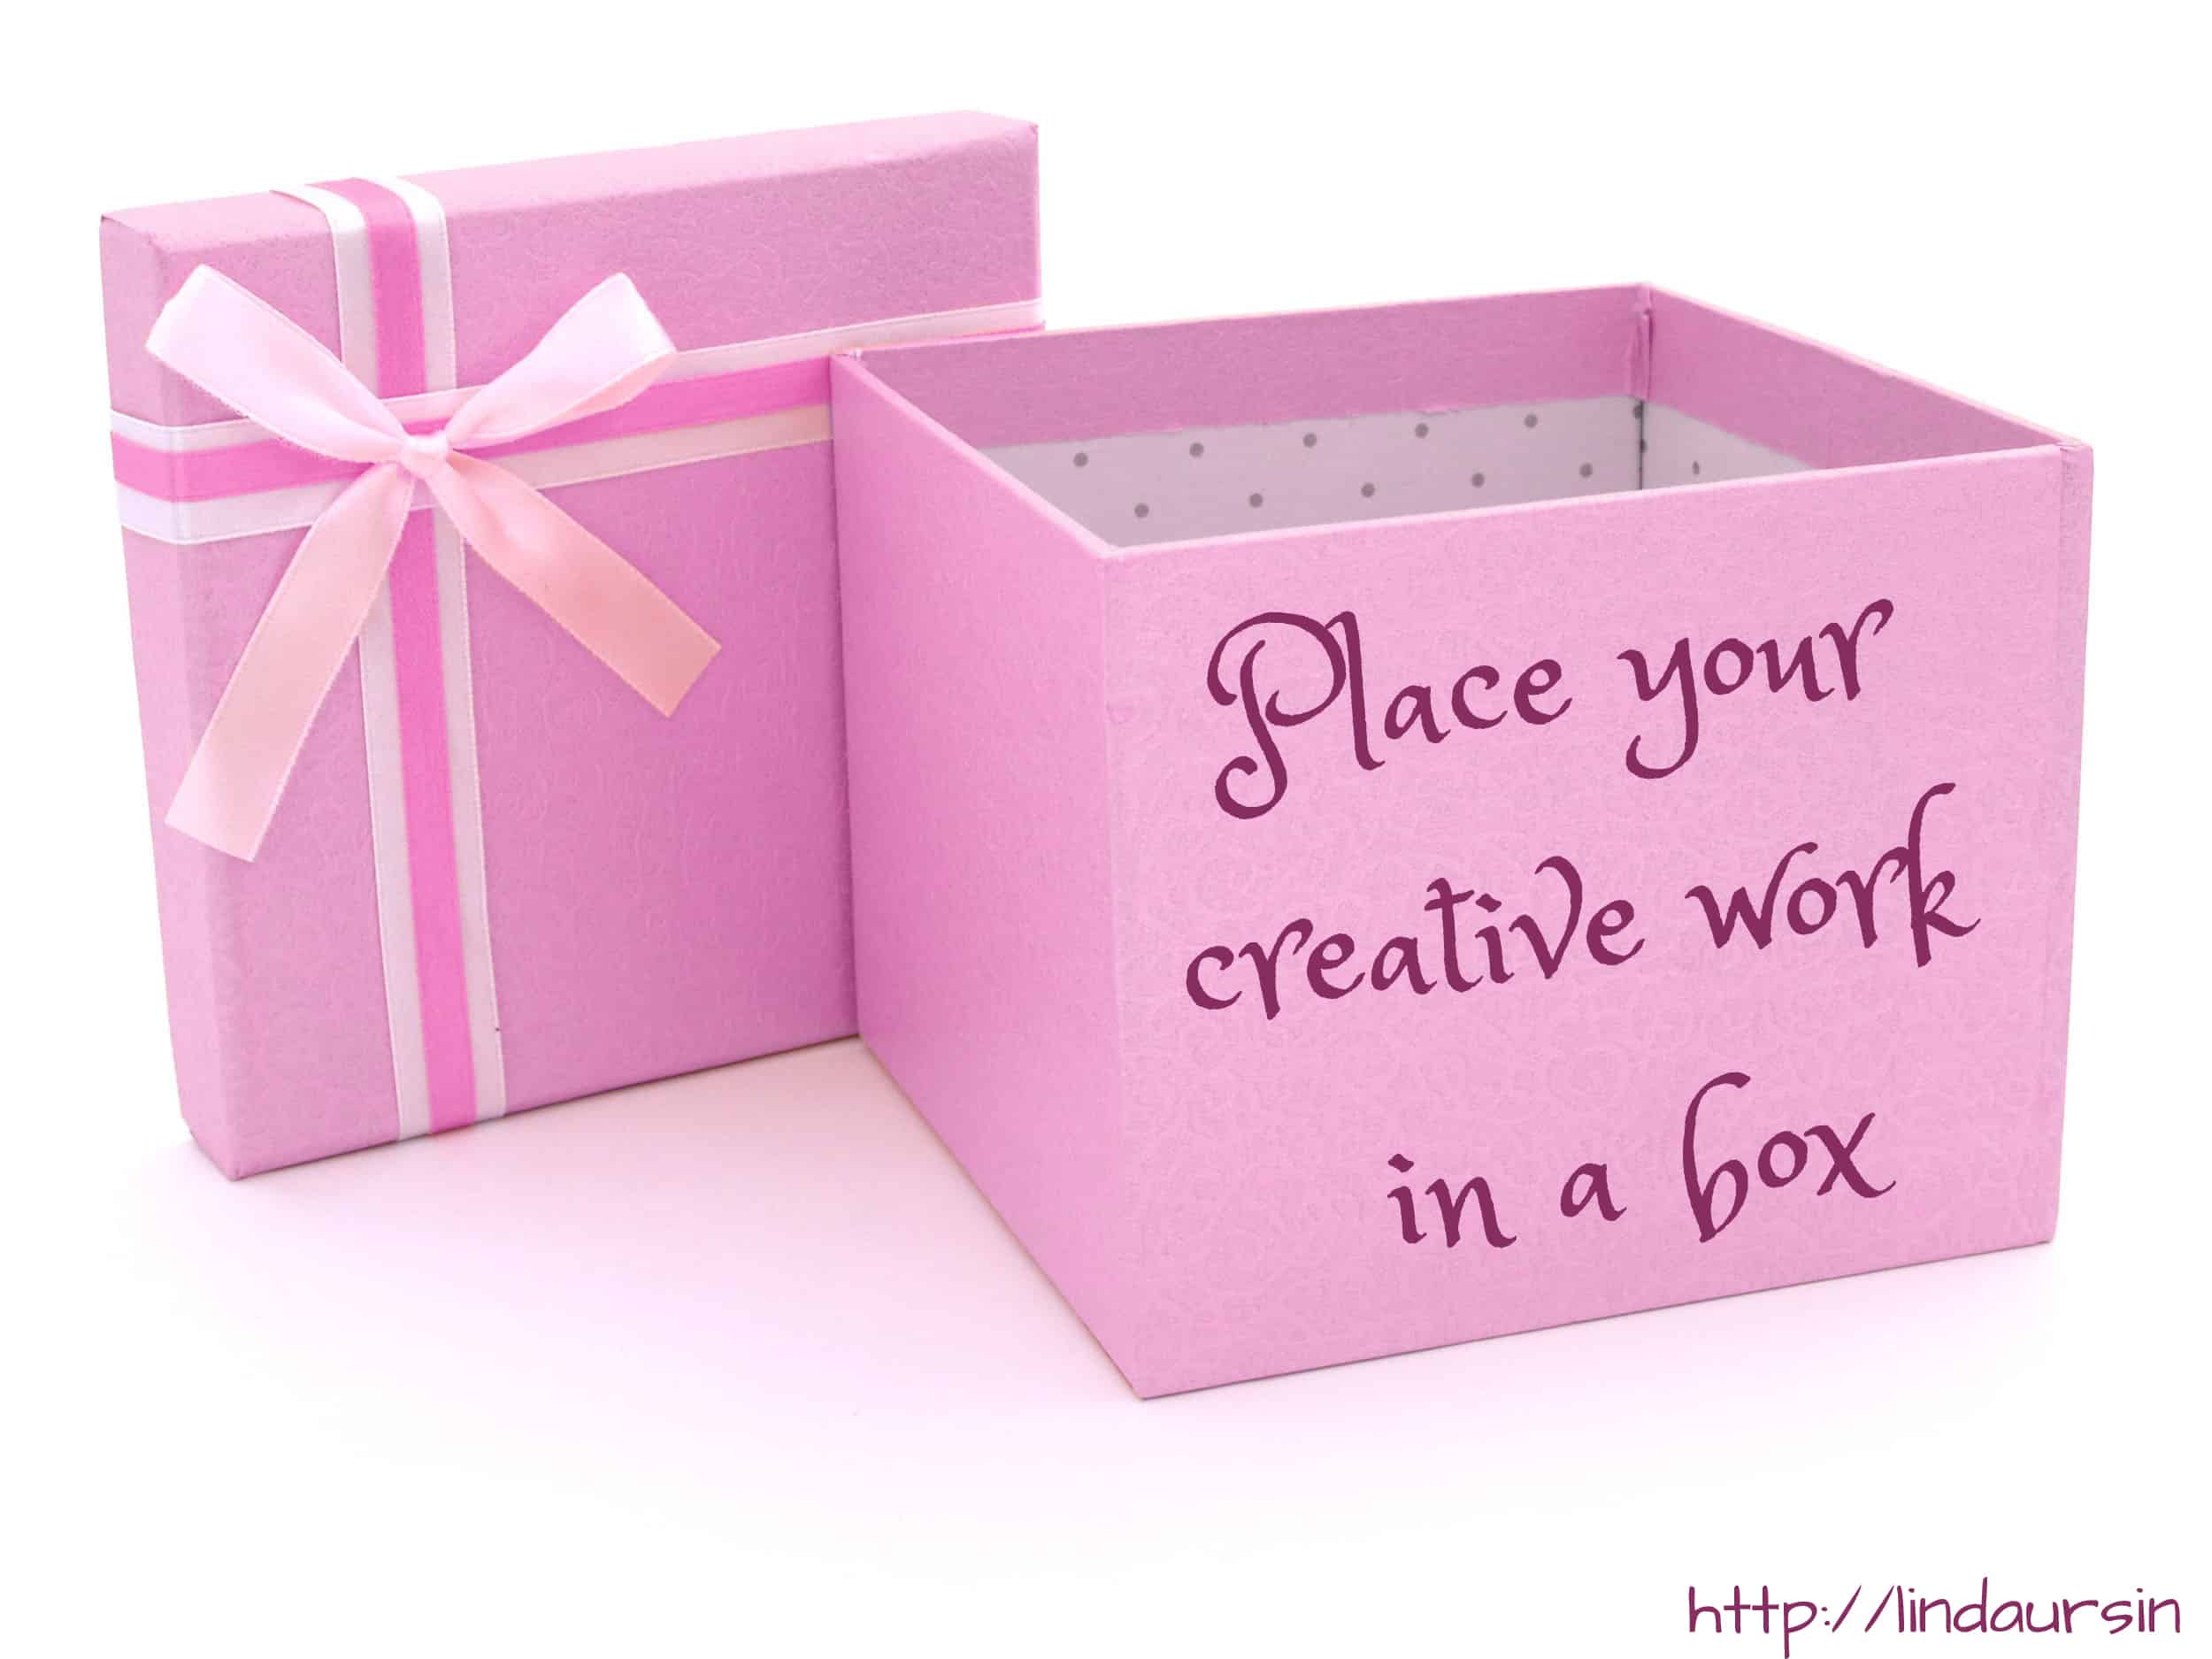 Place your creative work in a box